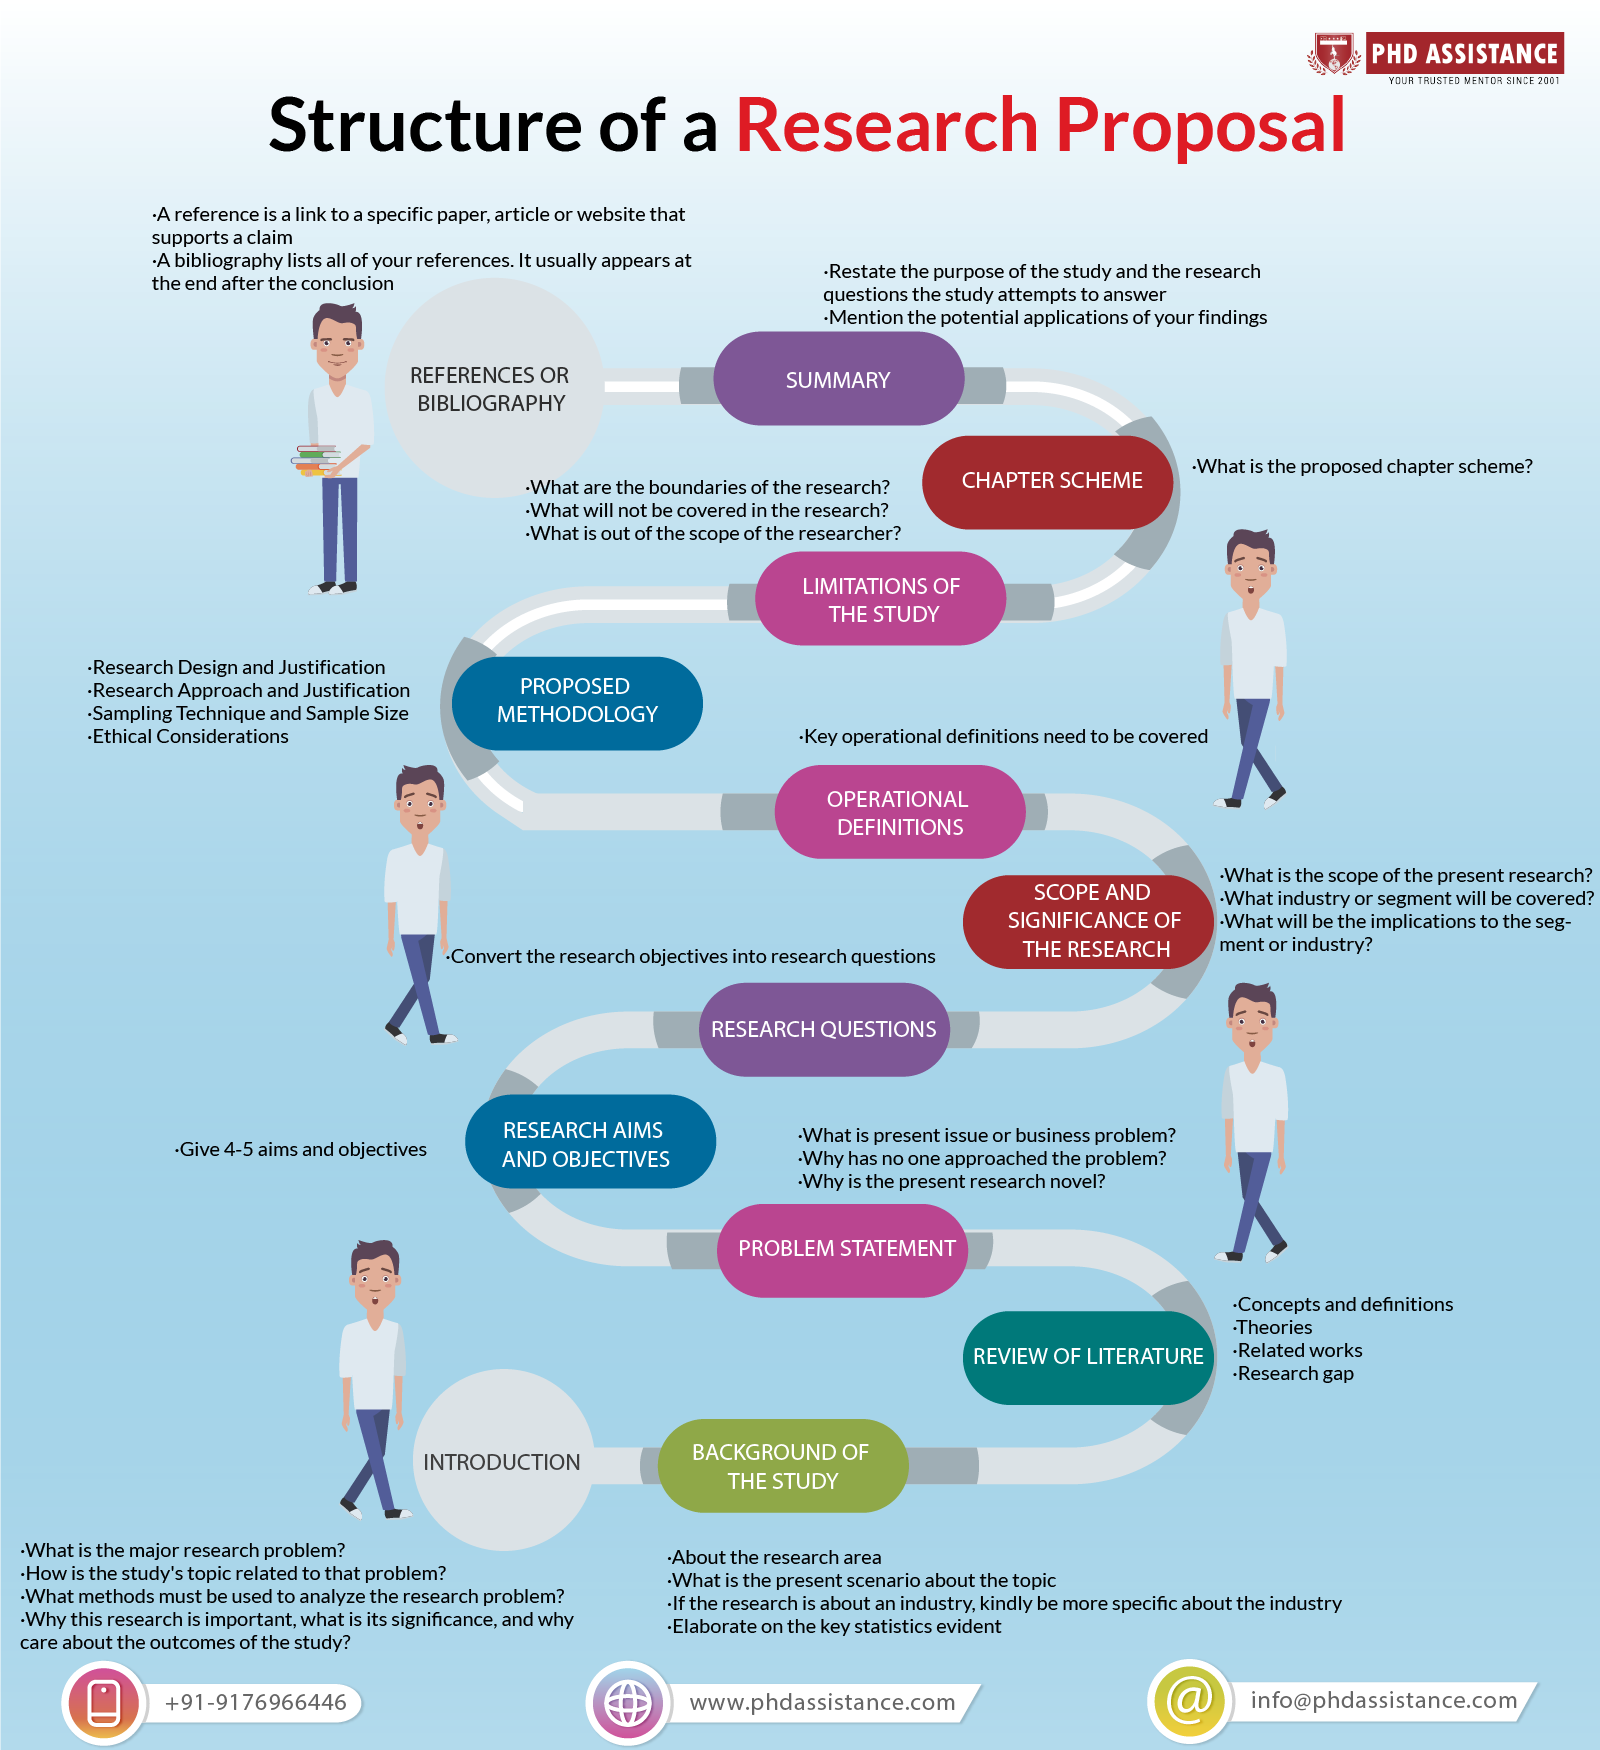 important parts or sections of a research proposal